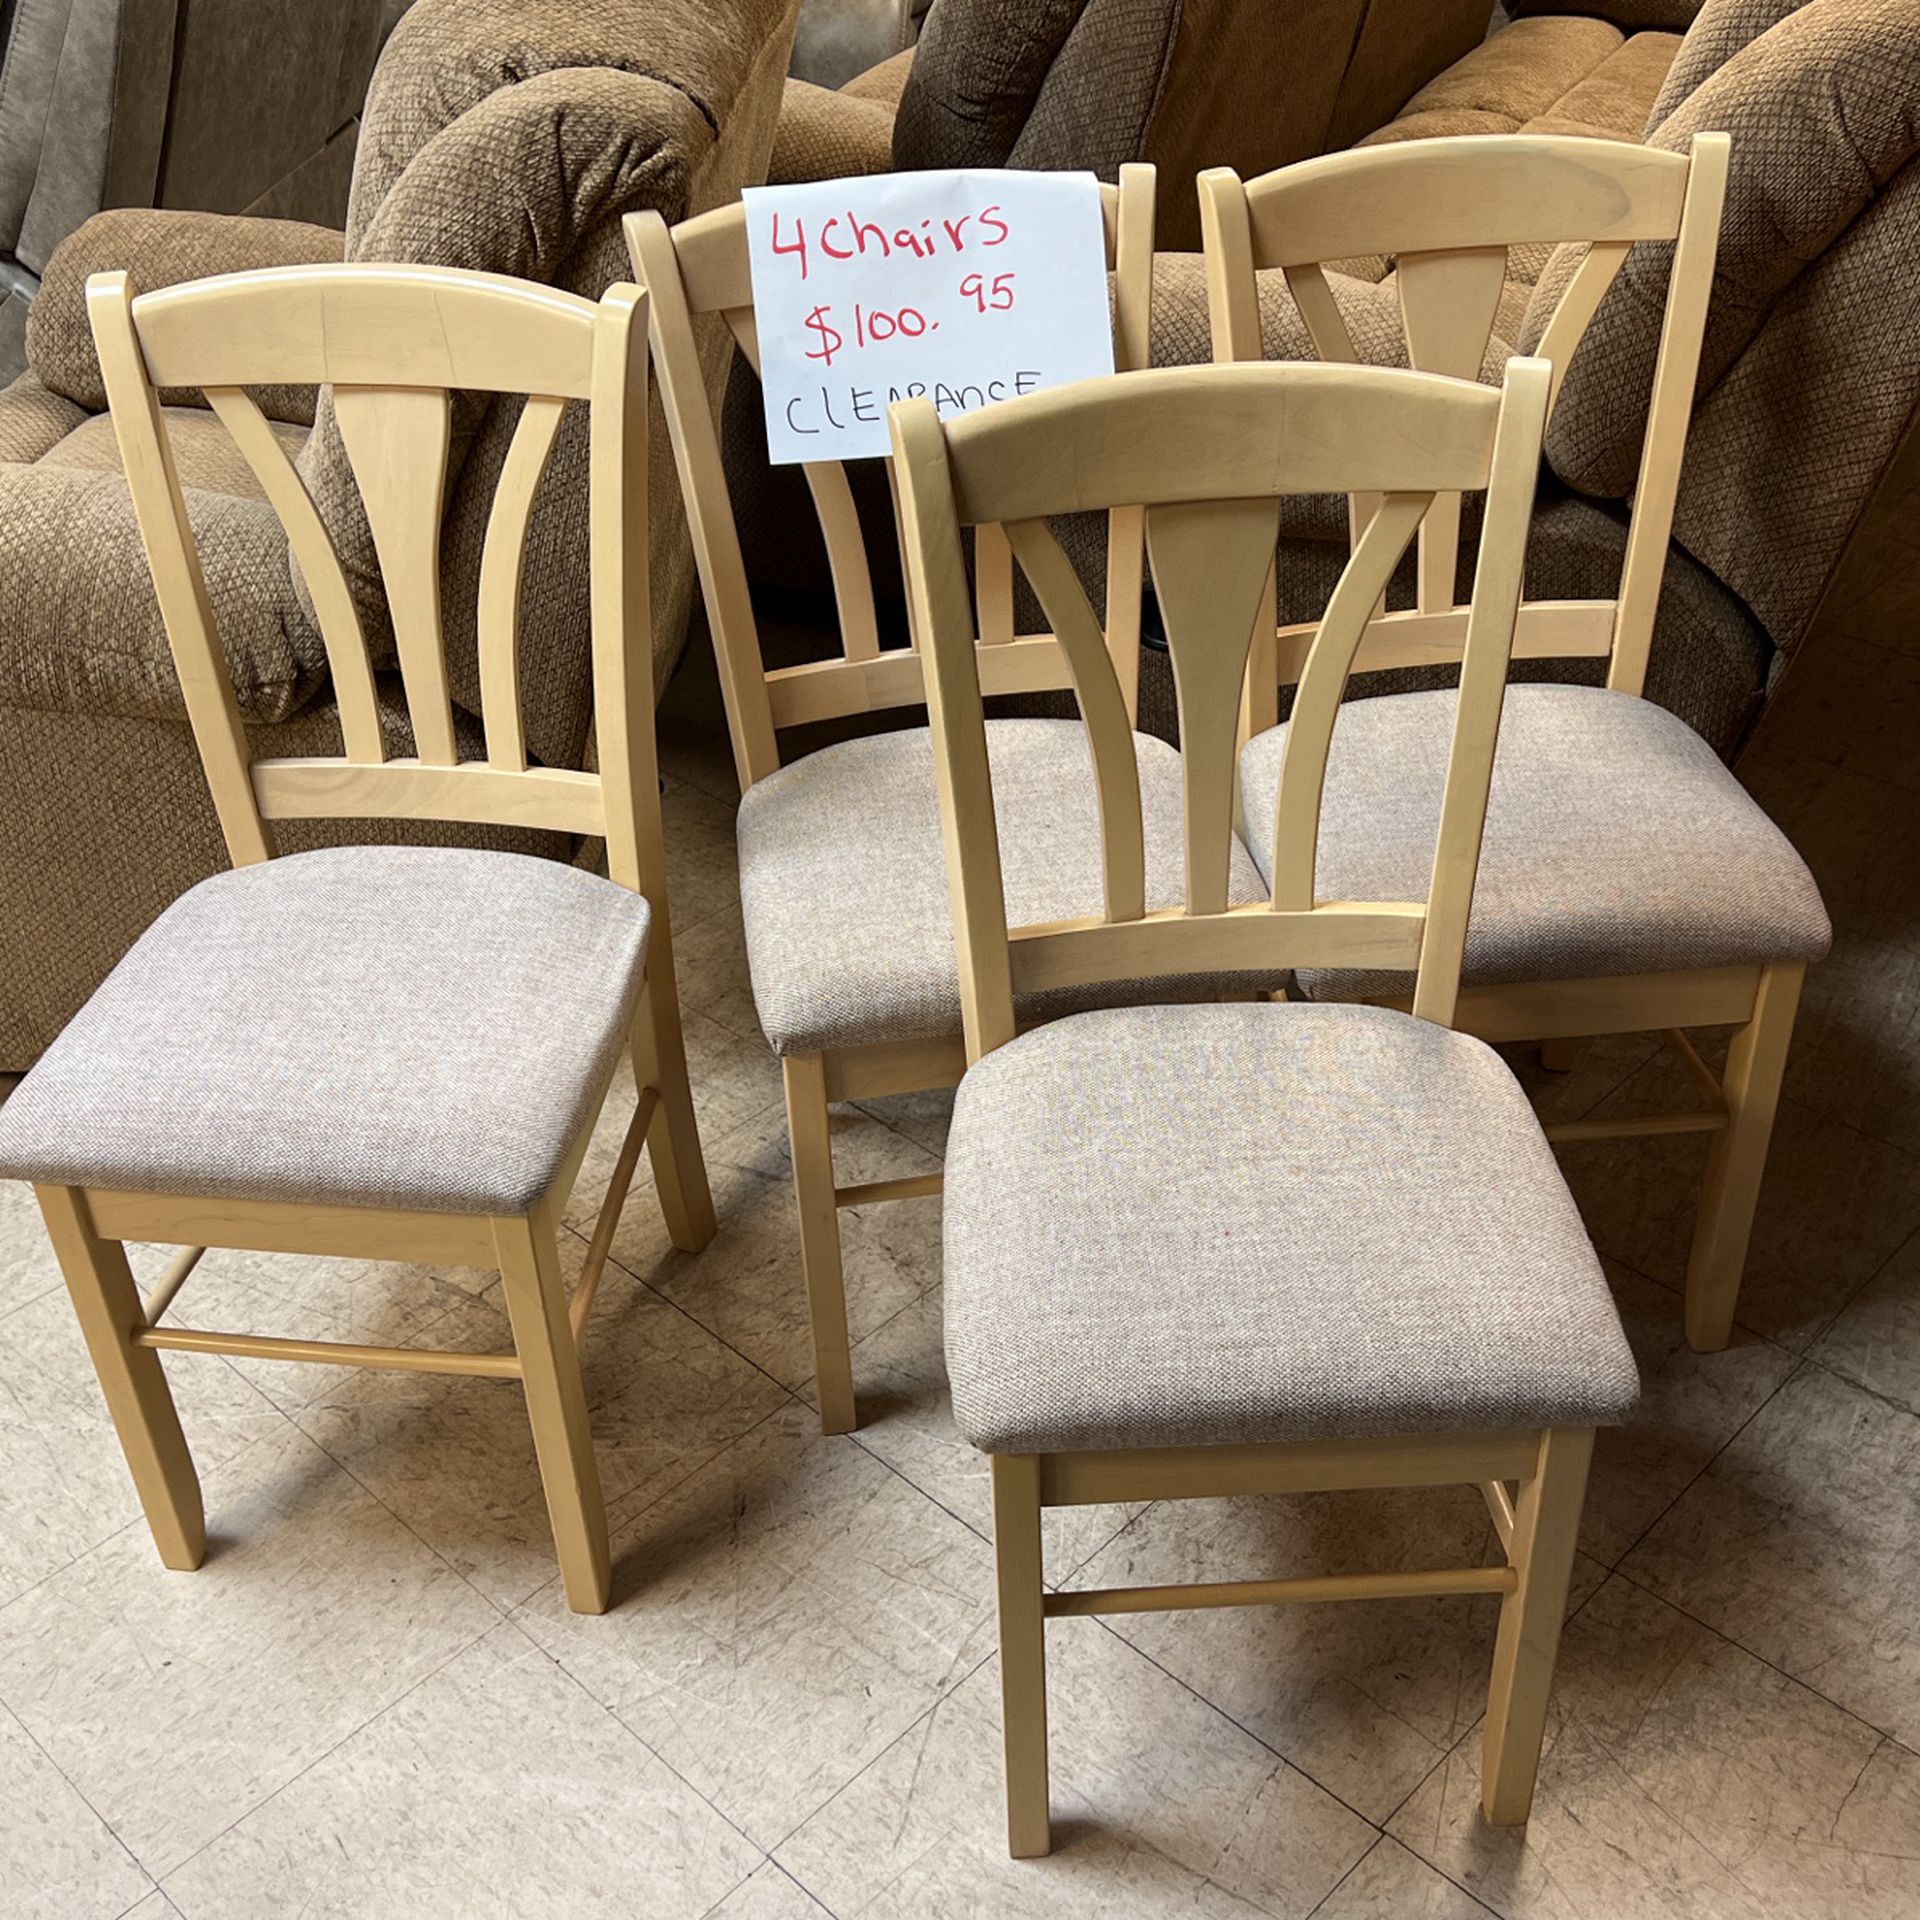 For brand new chairs for $100 cash only brand new all four chairs $100